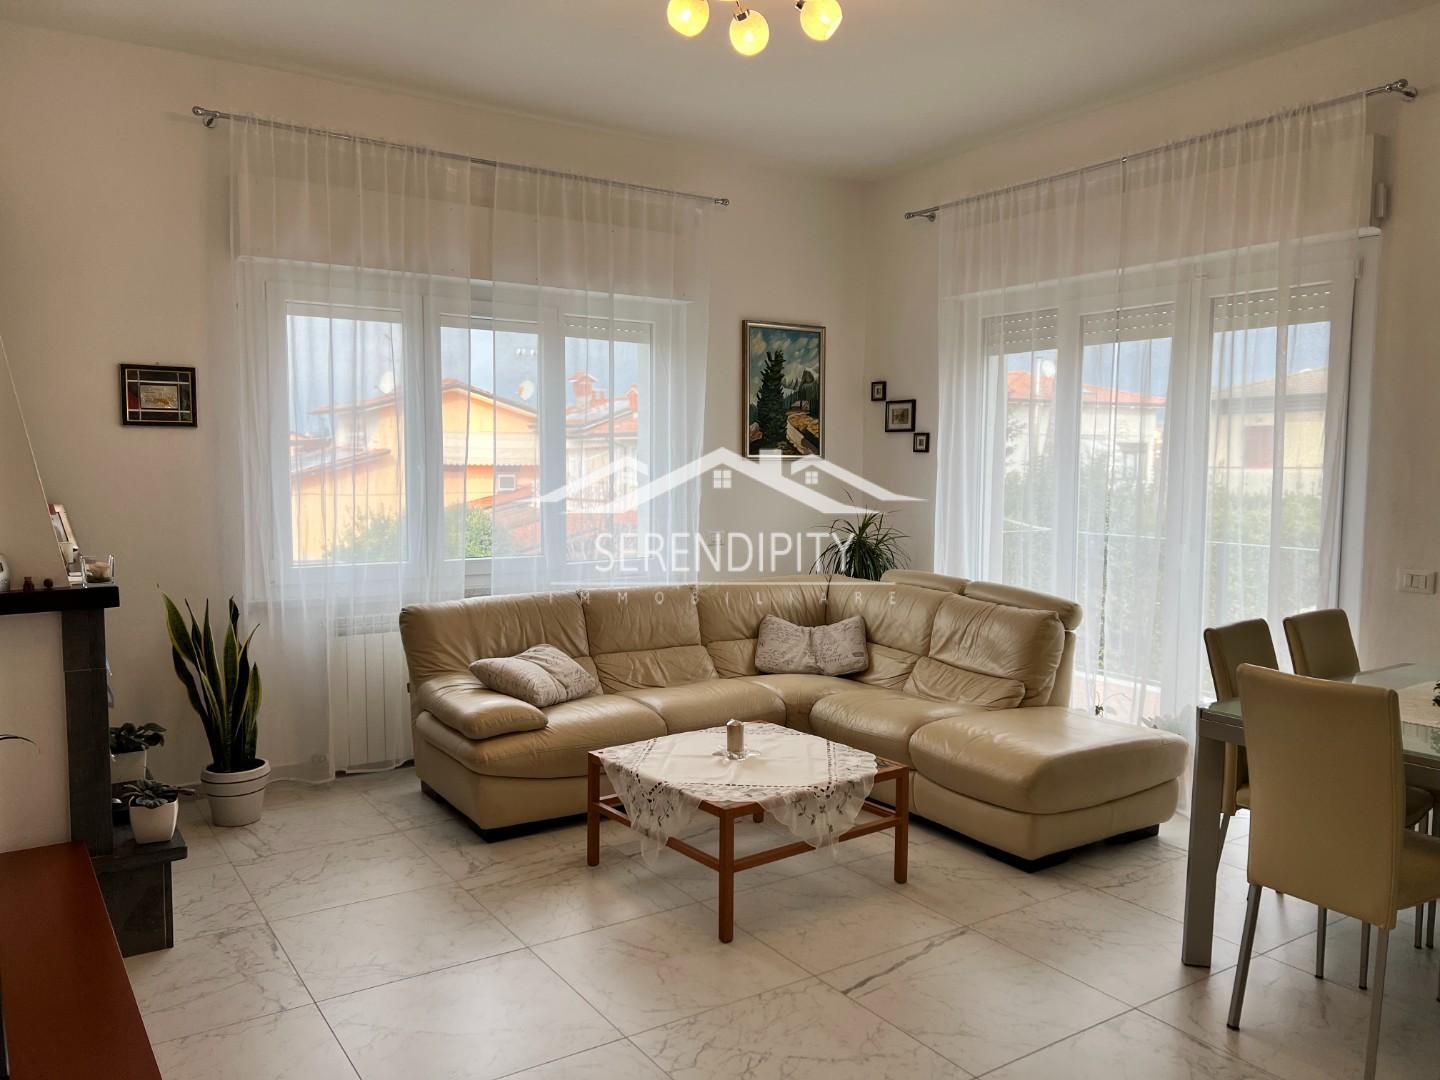 Three-family cottage for sale in Carrara (MS)